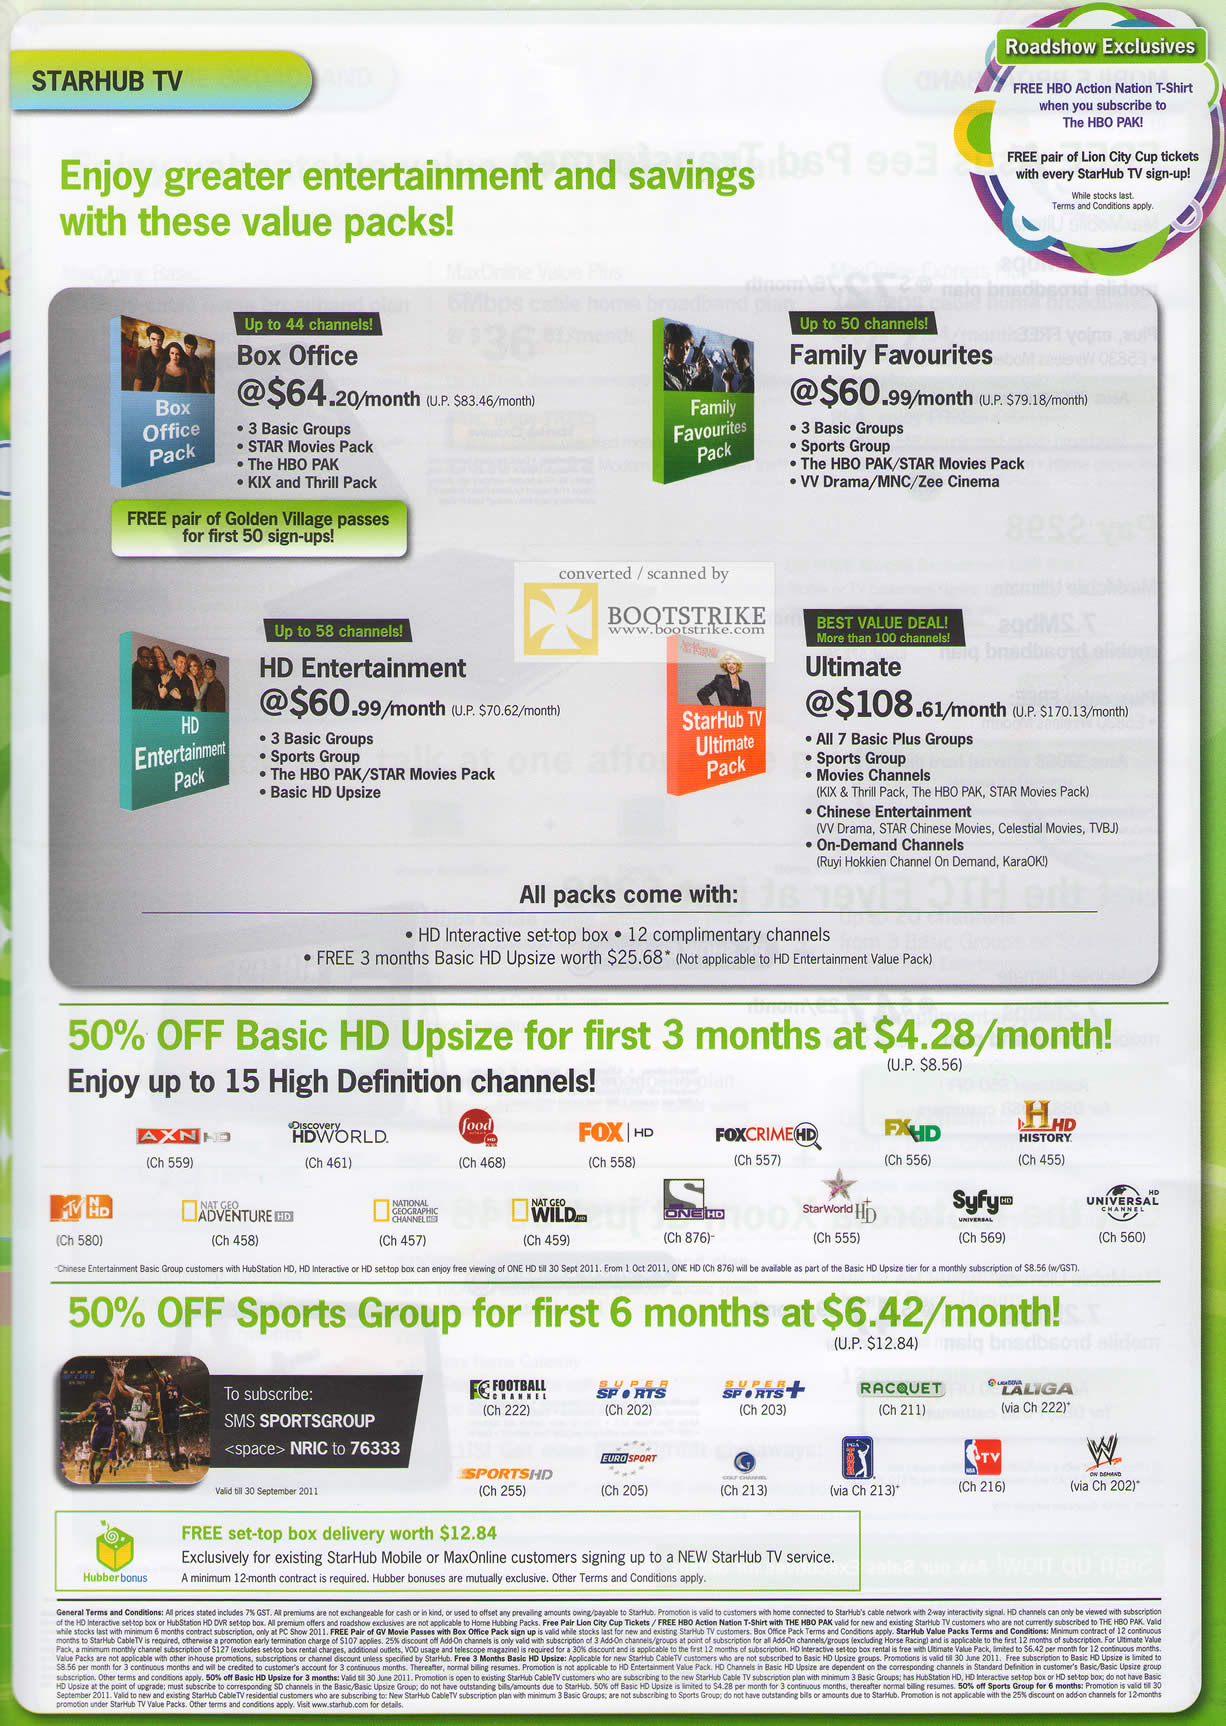 PC Show 2011 price list image brochure of Starhub TV Box Office Family Favourites HD Entertainment Ultimate Basic HD Upsize Sports Group